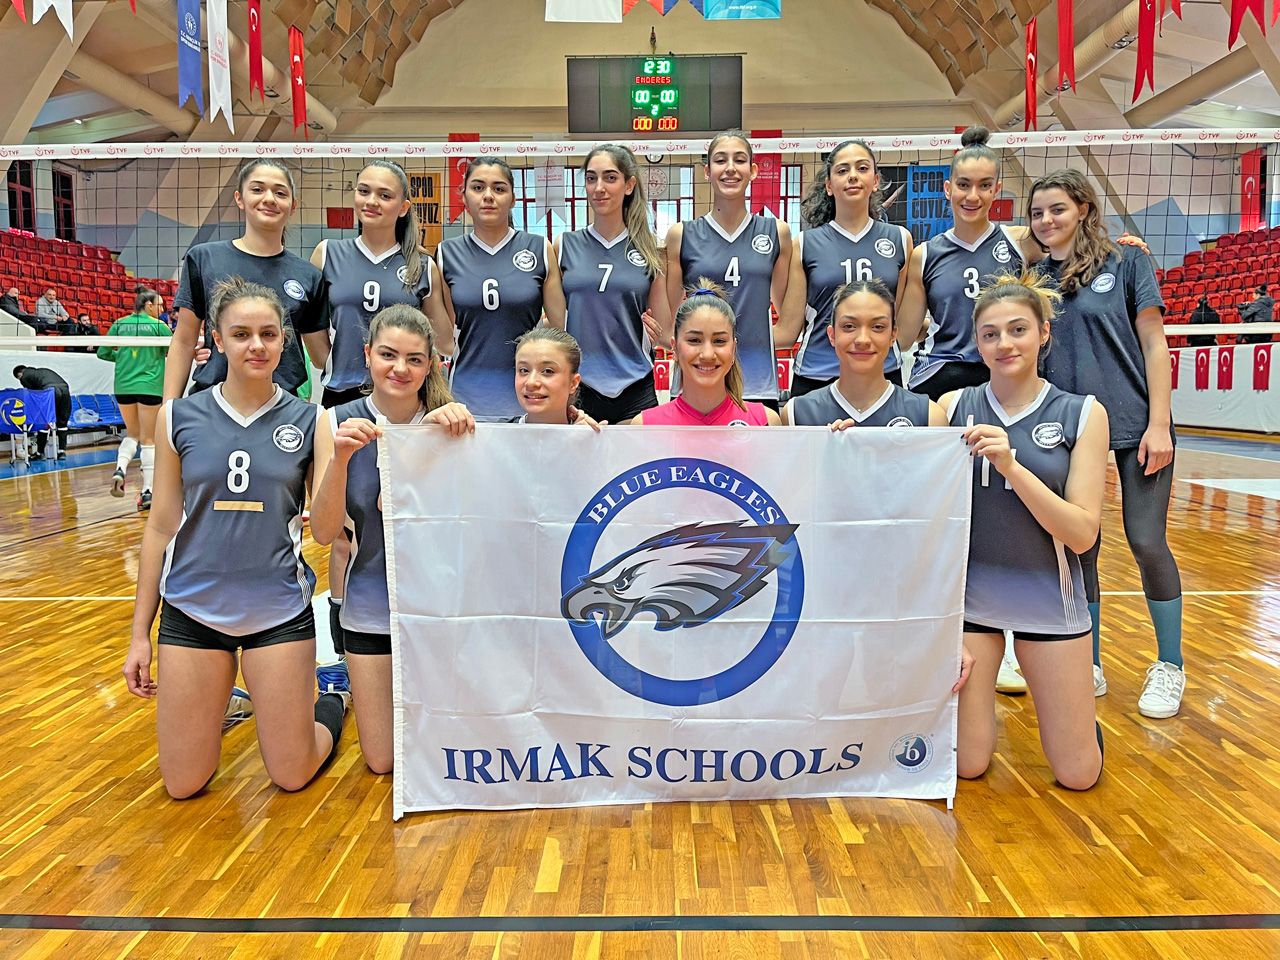 Our volleyball team came first in the Turkey Championship